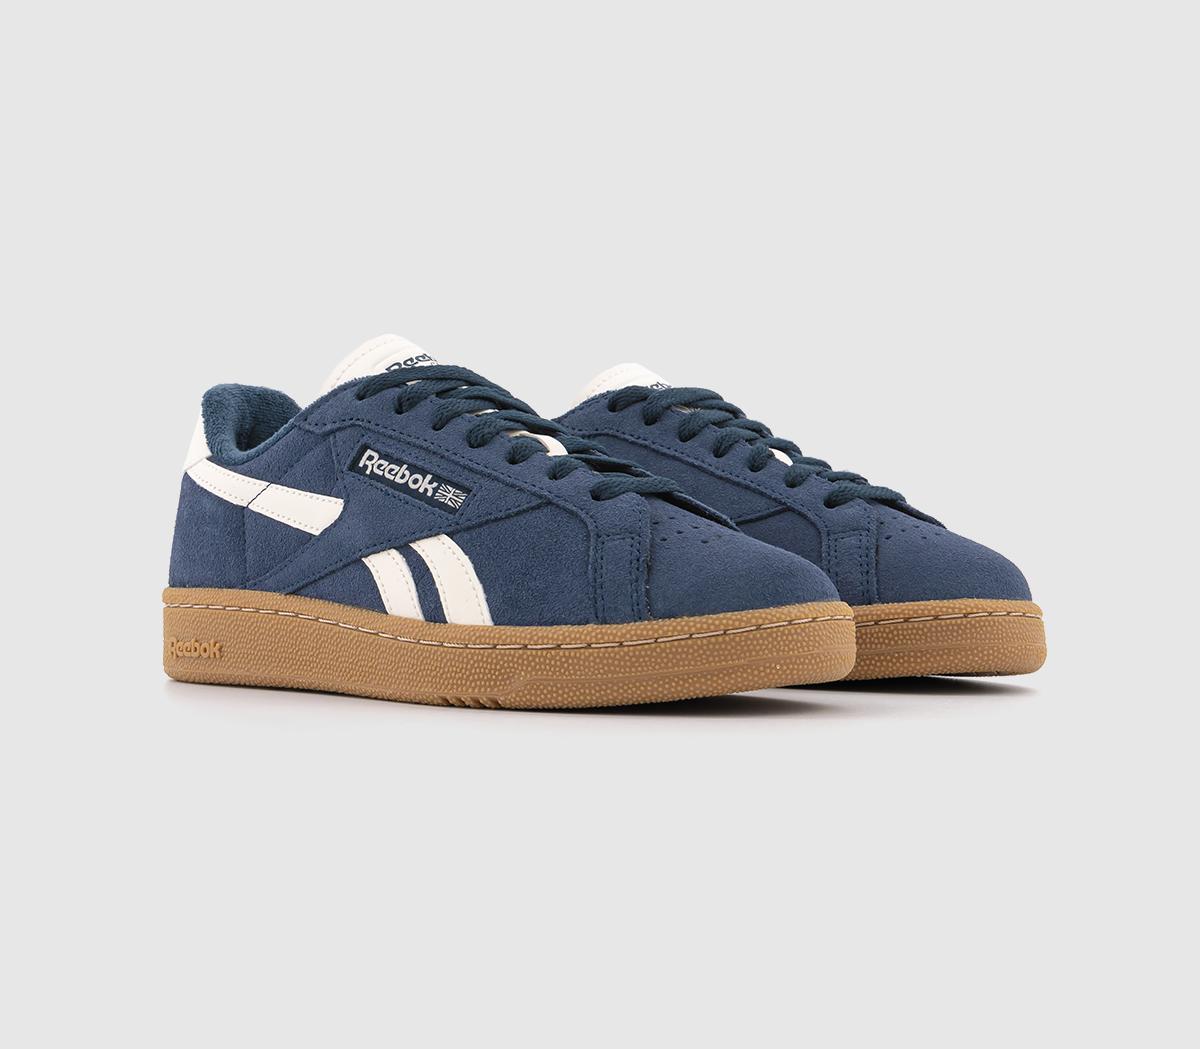 Reebok Womens Club C Grounds Trainers Vector Navy Blue, 9.5